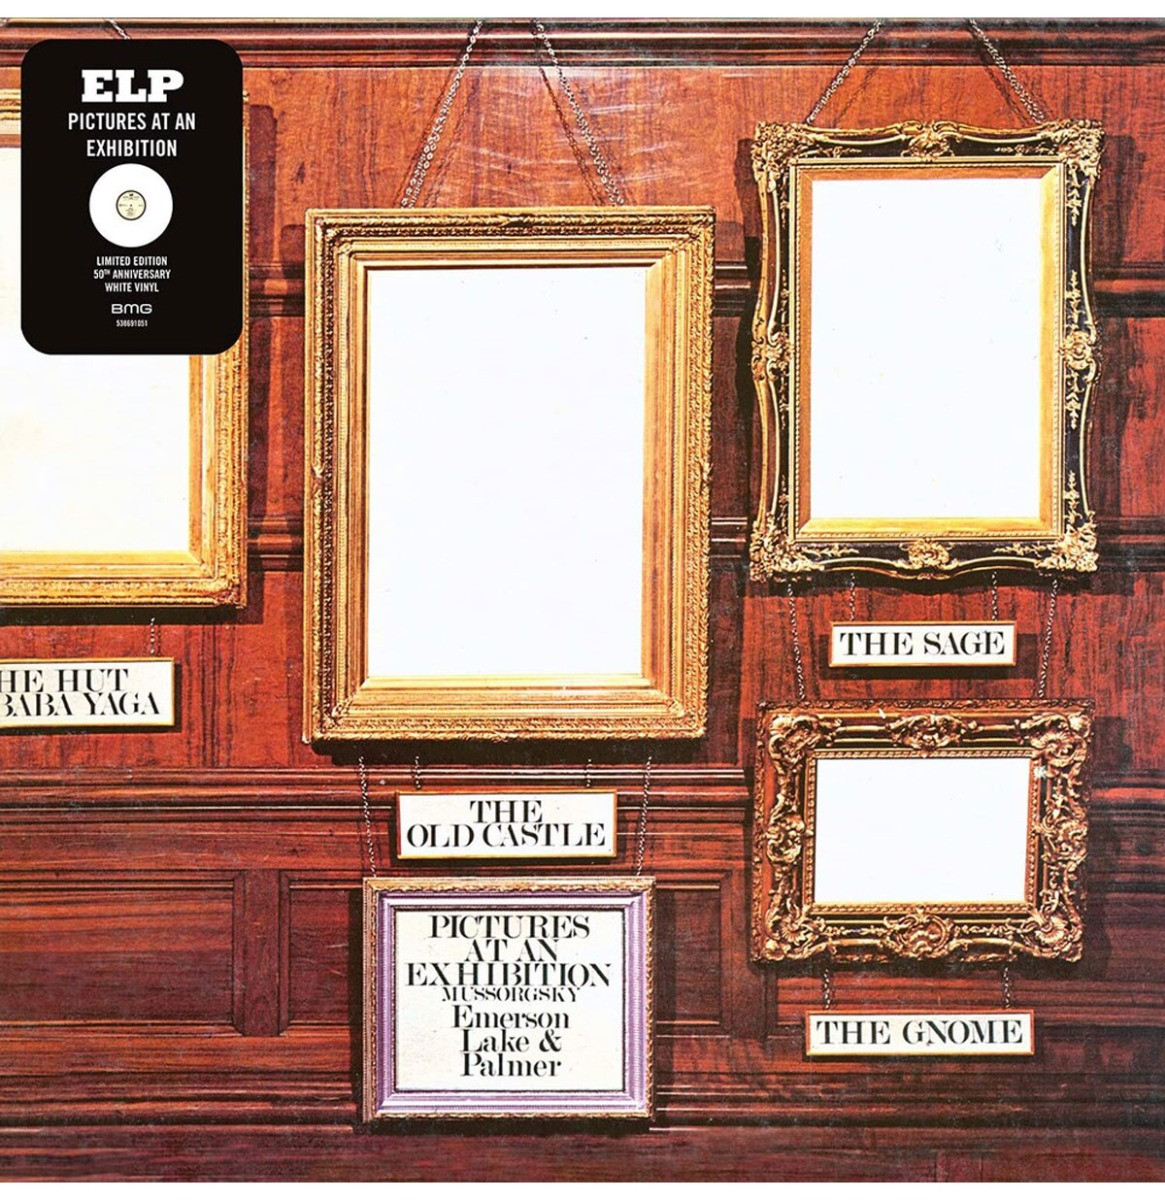 Emerson, Lake & Palmer - Pictures At An Exhibition (Coloured Vinyl) (Record Store Day Black Friday 2021) LP